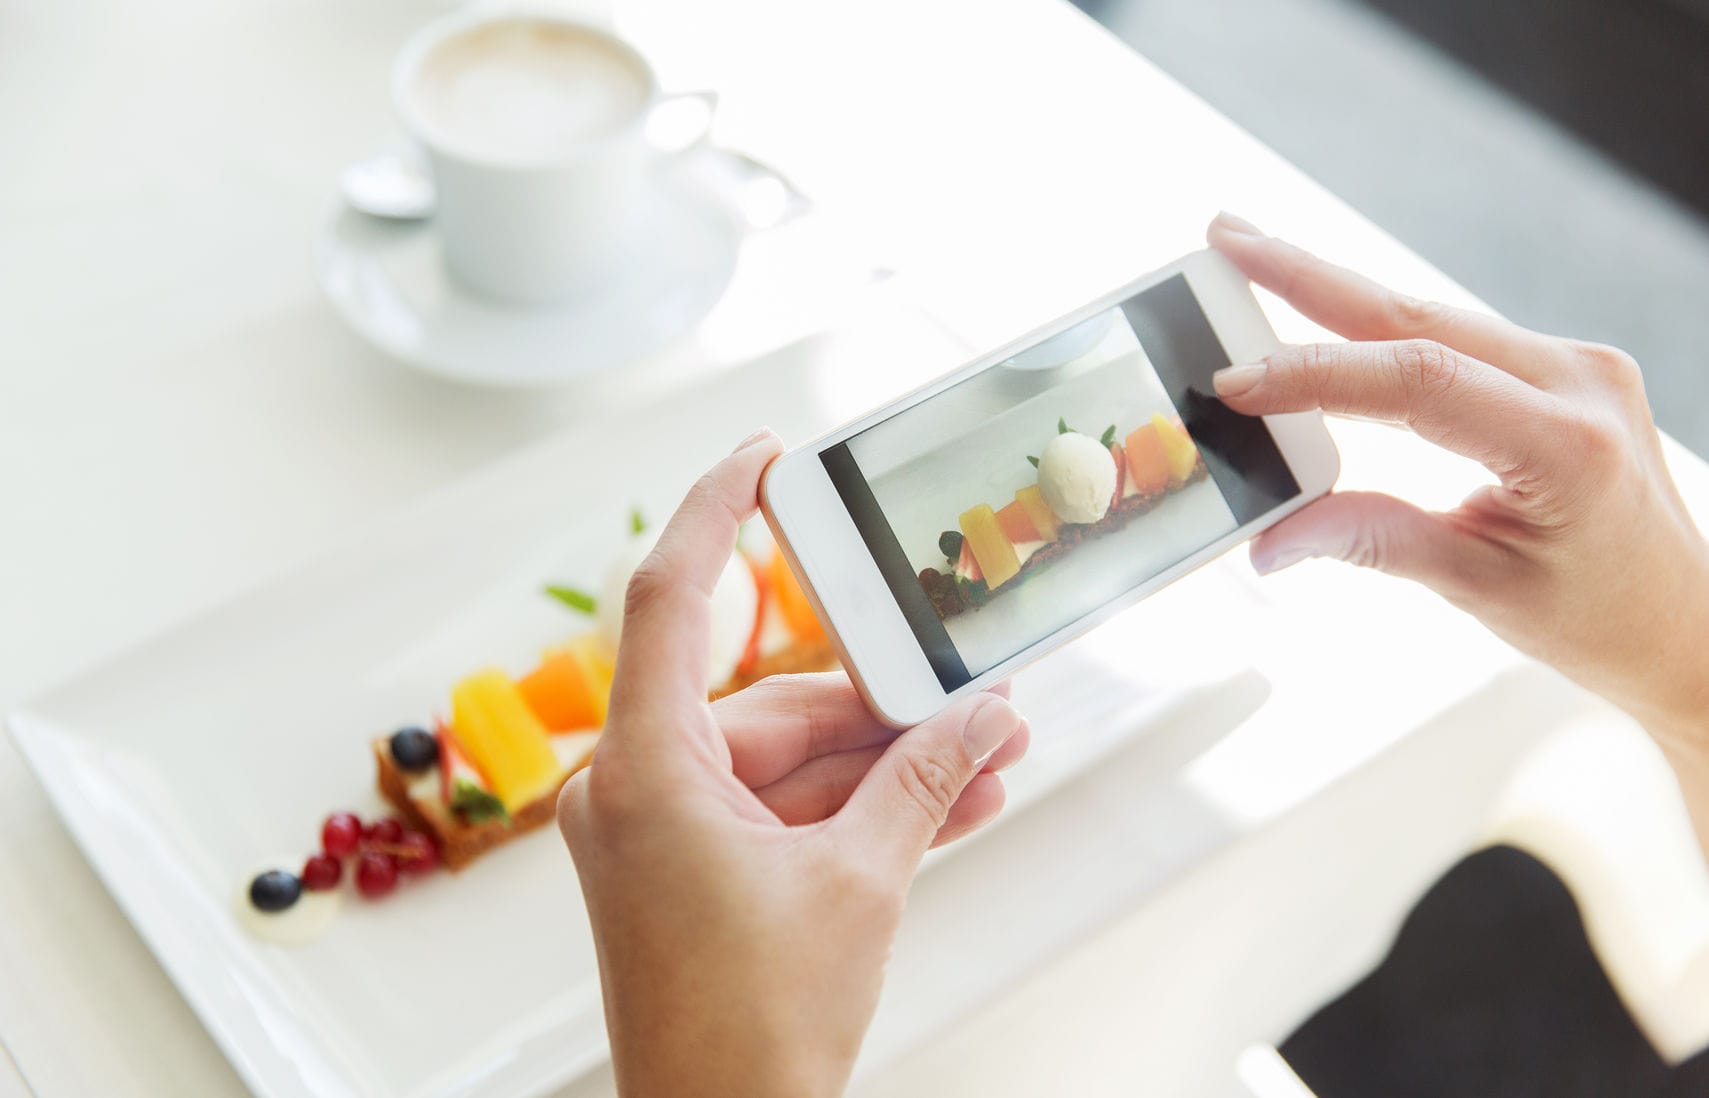 Foodie Instagram Trend: Make the Most Out of It! [INFOGRAPHIC]